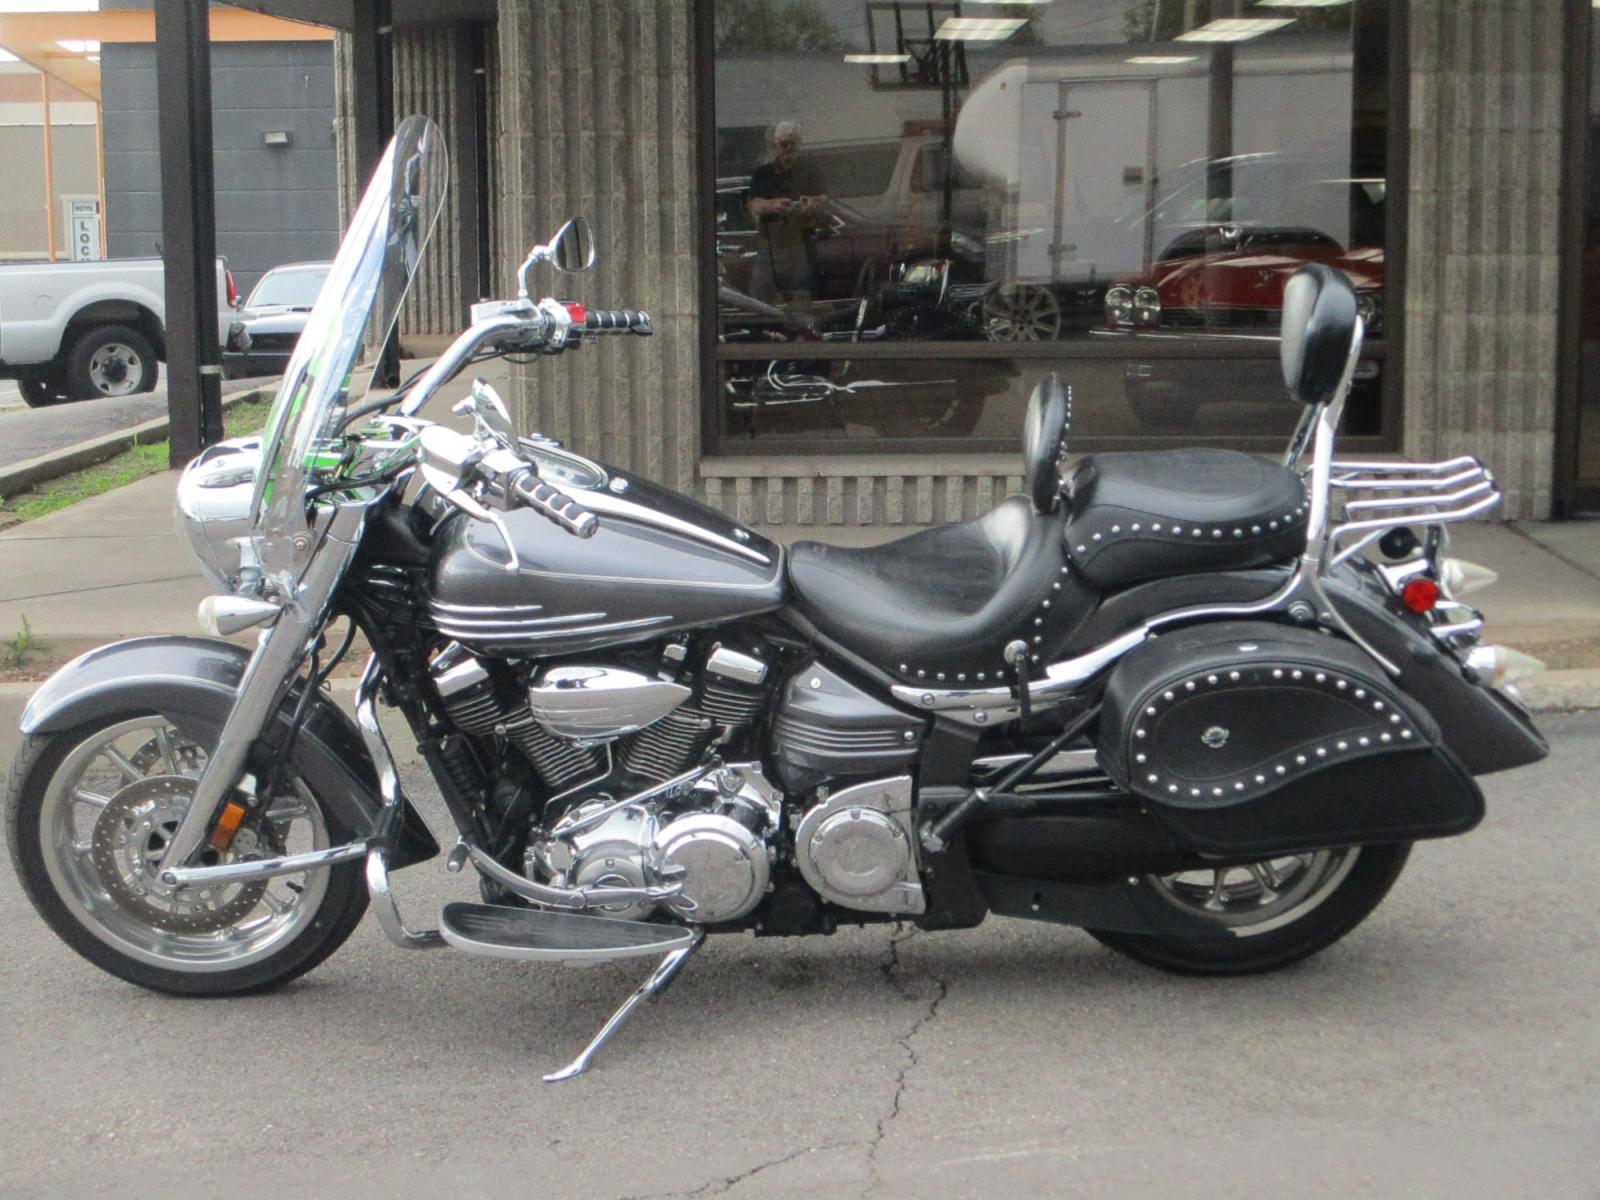 2007 Yamaha XV1900CT - (JYAVP22EX7A) with an 1900CC engine, located at 3240 Washington Blvd., Ogden, 84401, (801) 621-7177, 41.204967, -111.969994 - This is a beautiful Stratoliner S. It has premium Viking saddle bags and Custom Mustang seats. Road ready and rearing to go. Many custom features as seen in the pictures. $5,588. - Photo #2